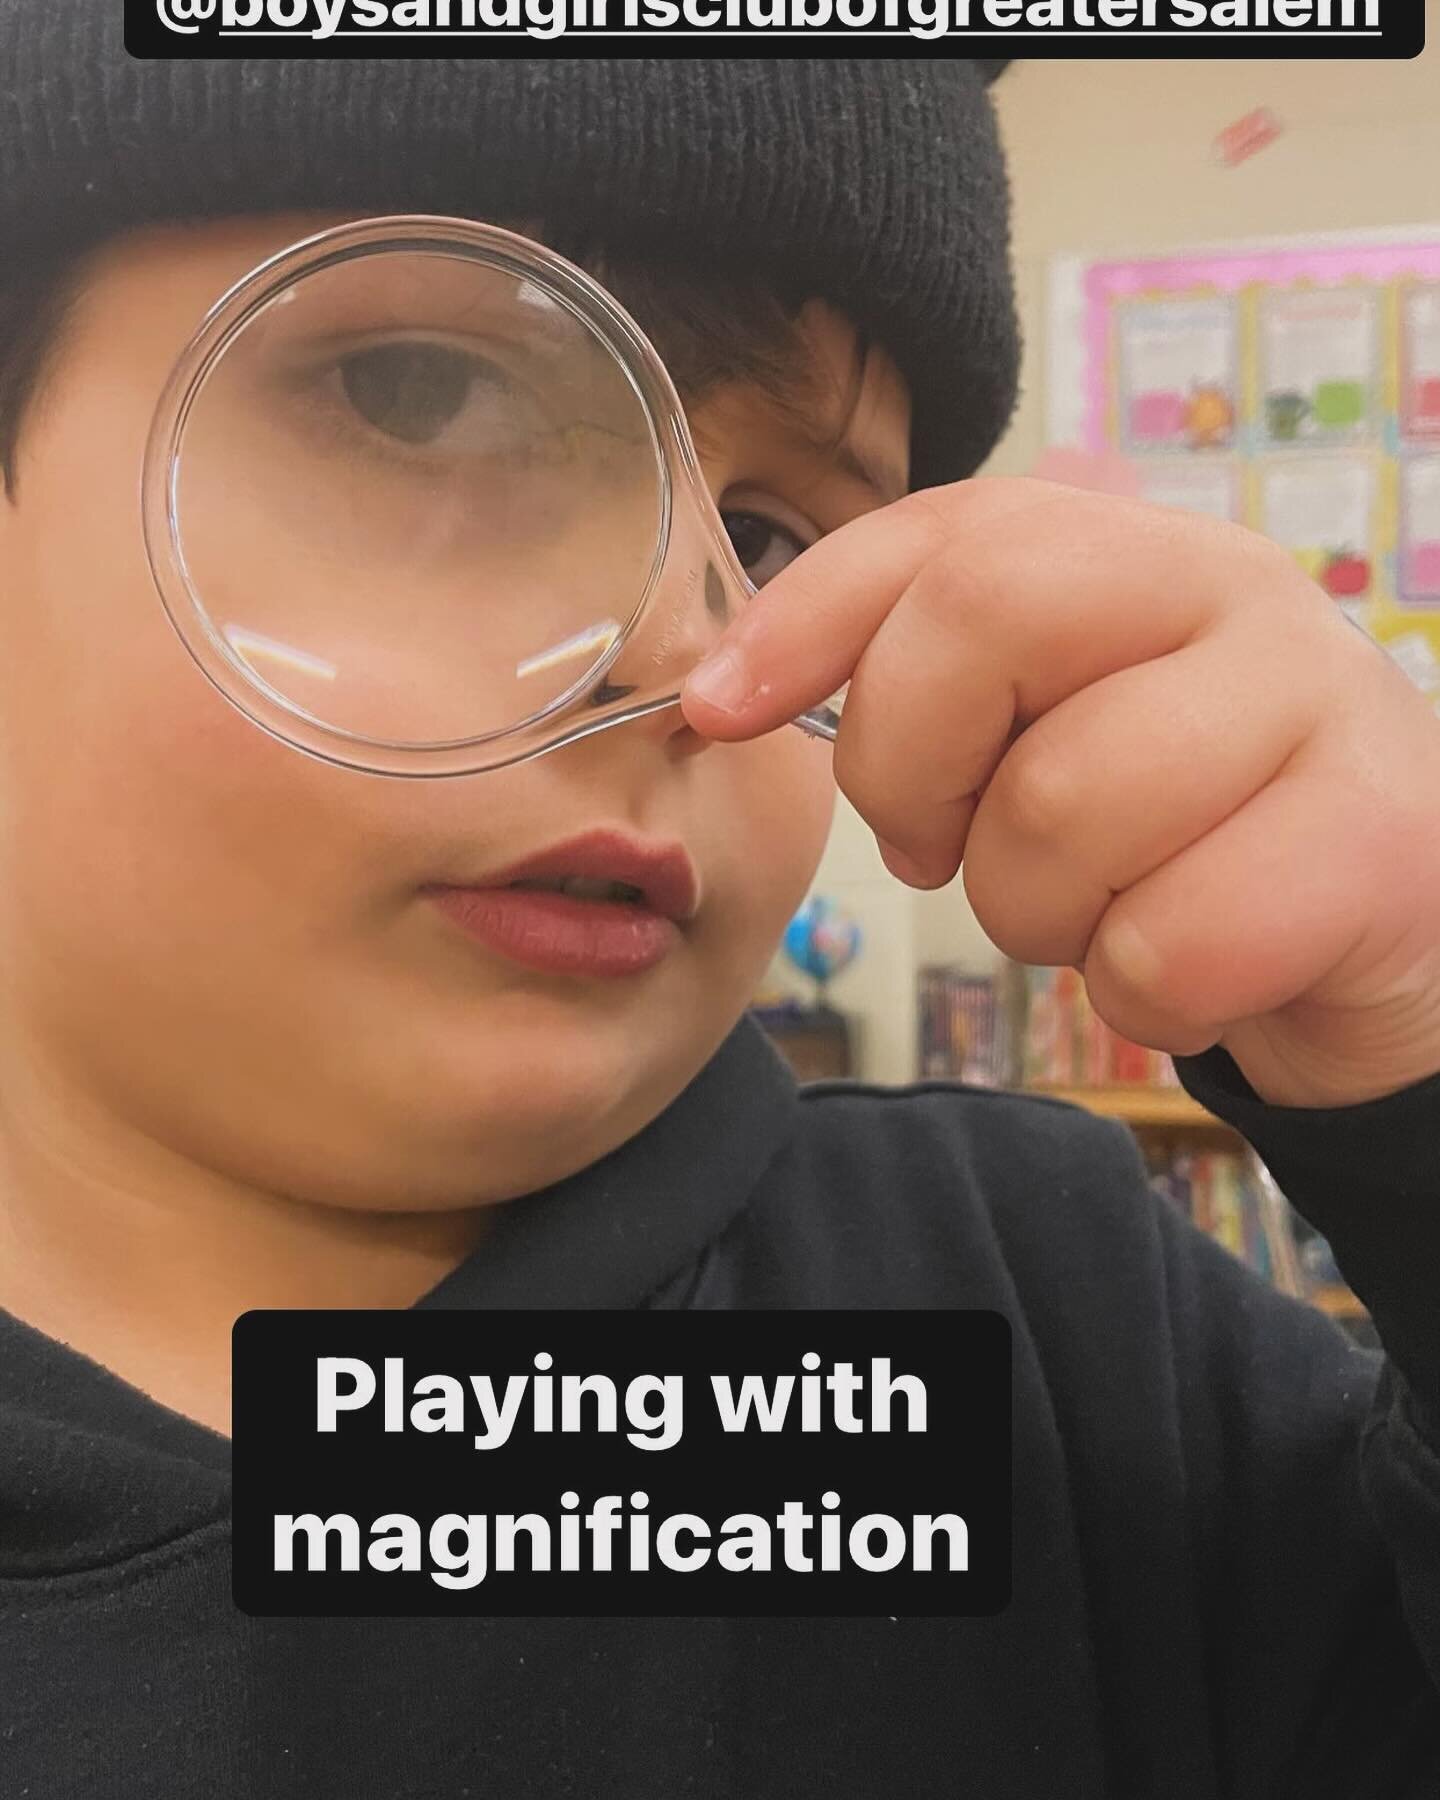 Playing with magnification after school!